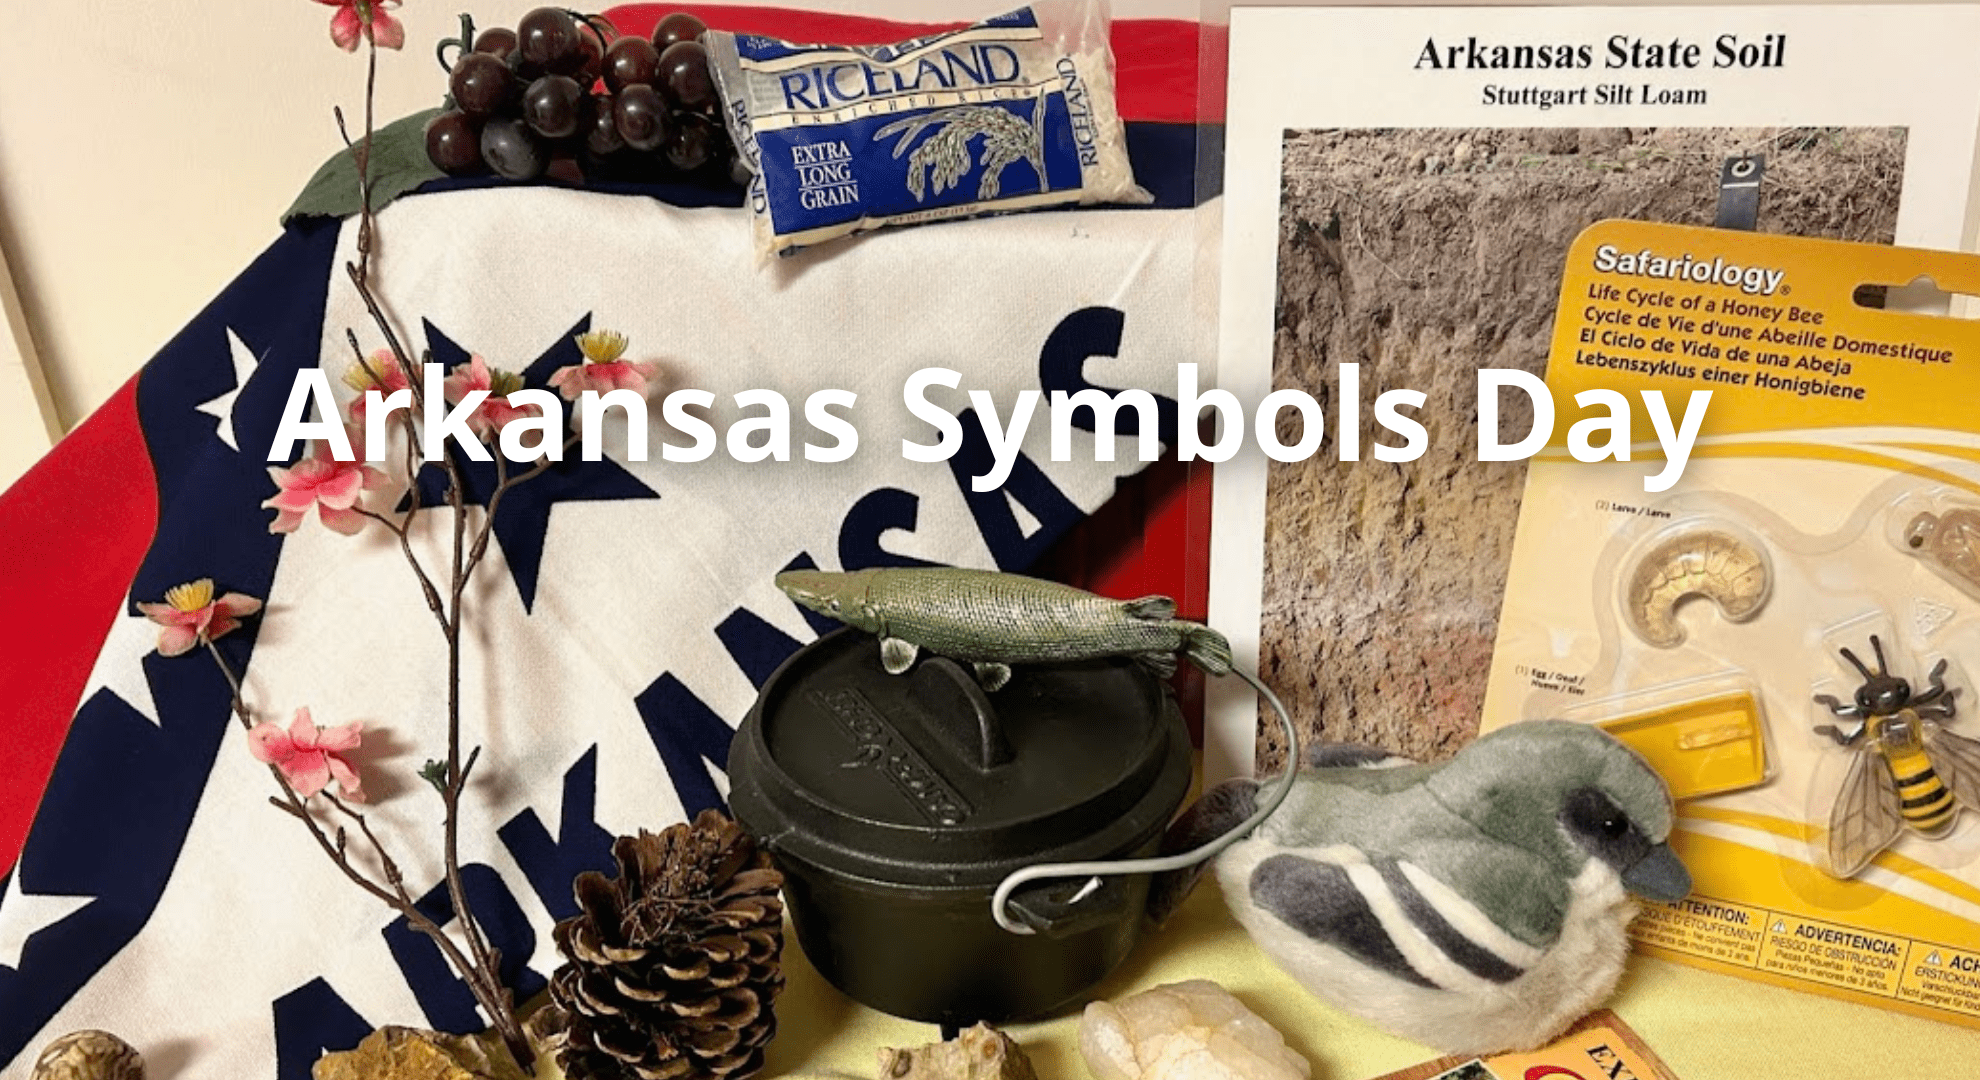 Red, white, and blue Arkansas flag in left corner, bag of Riceland rice, photo of Stuttgart soil from the Arkansas delta, small Dutch oven with a green plastic fish on top.